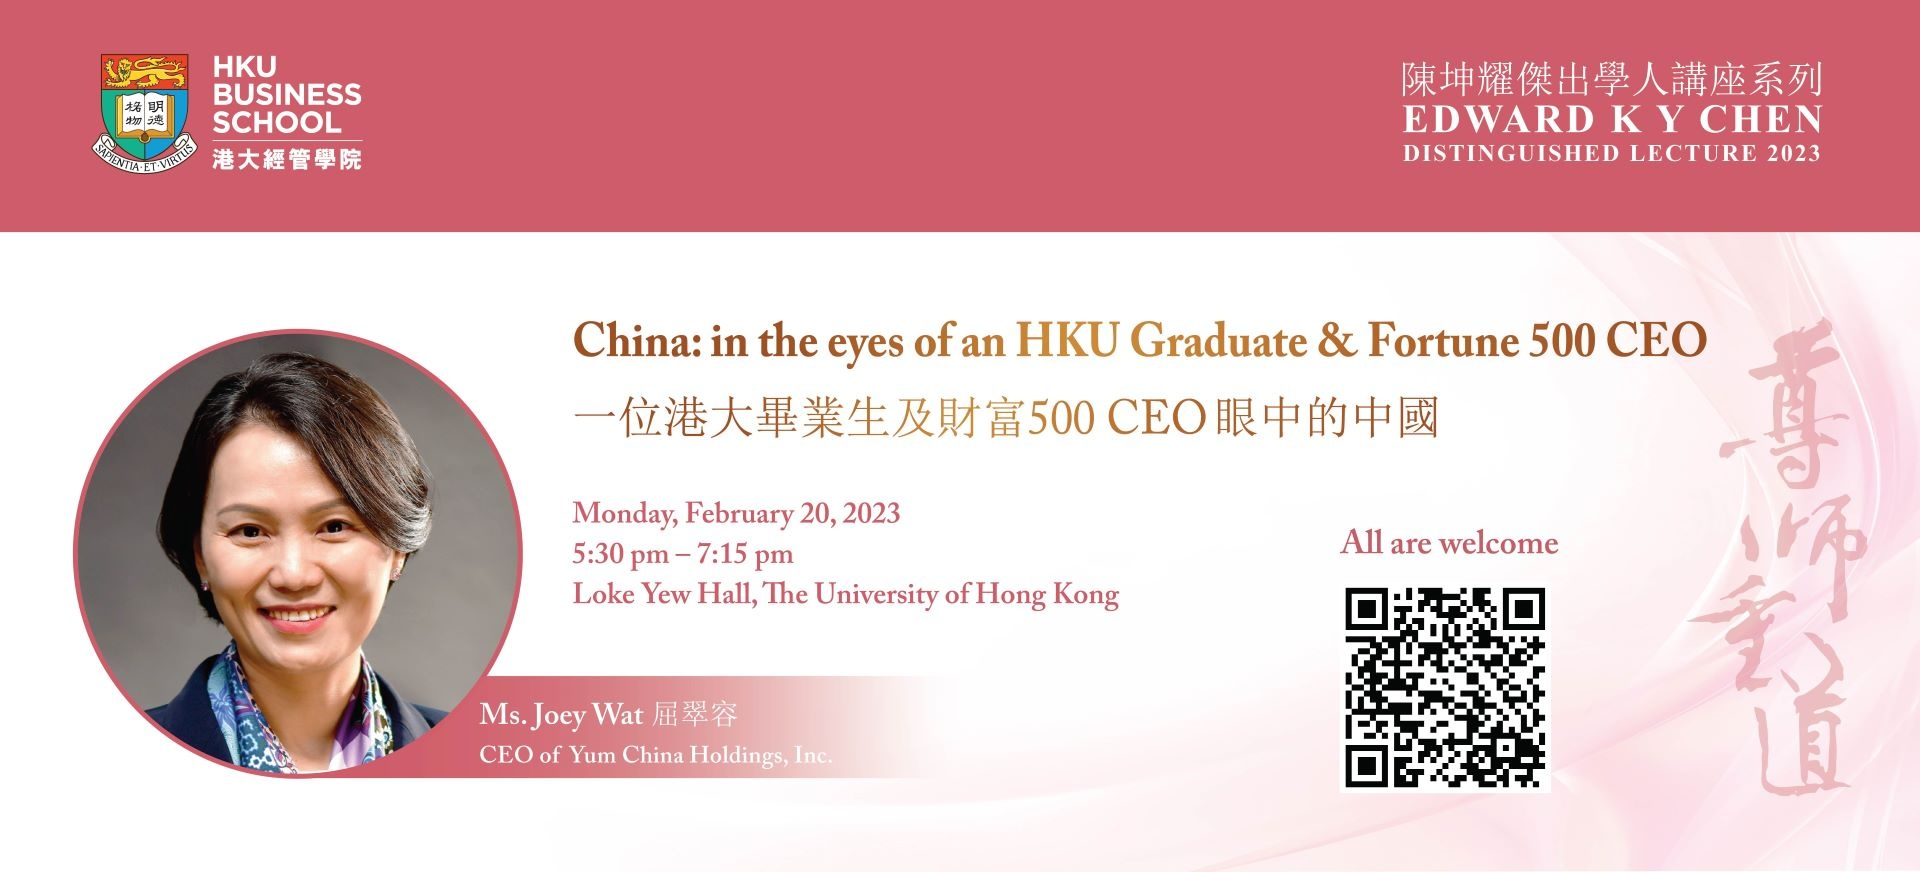 China: in the eyes of an HKU Graduate & Fortune 500 CEO 